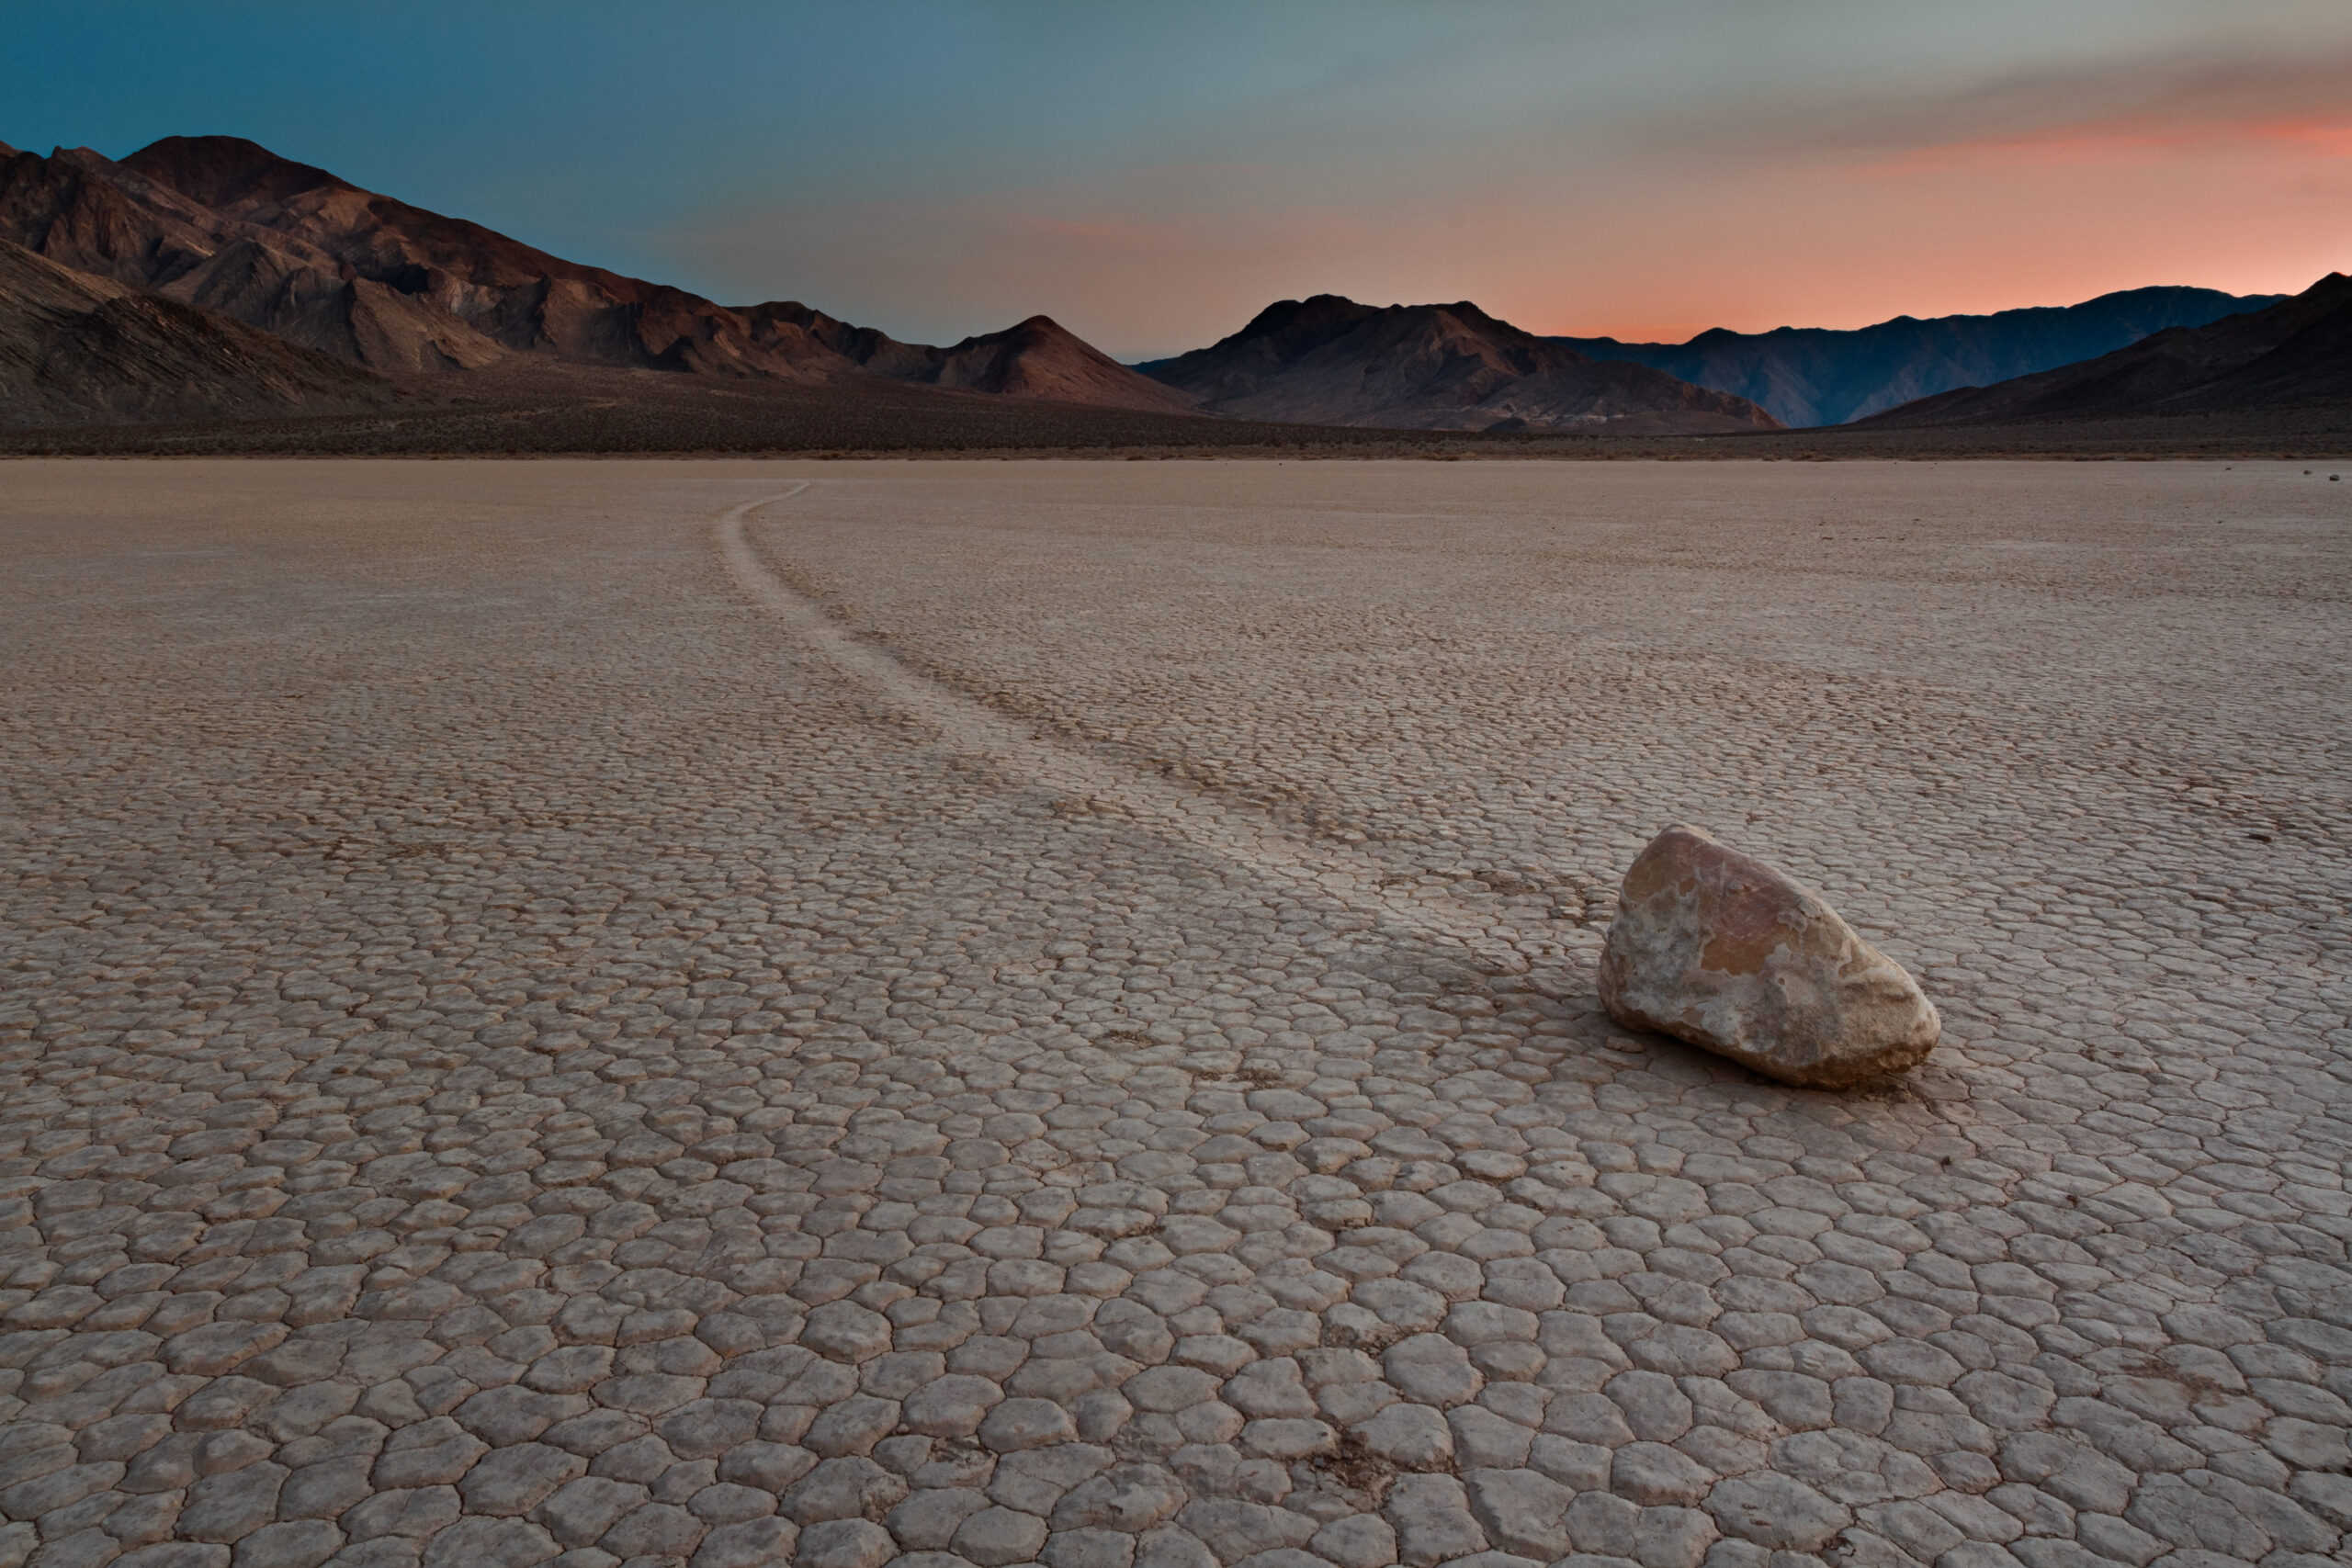 <p><span>In California’s Death Valley, the sailing stones move mysteriously across the dry lake bed known as Racetrack Playa. These rocks, some weighing hundreds of pounds, leave long trails behind them as they glide across the ground. The movement is driven by a combination of freezing and thawing cycles that create a slick surface, allowing the stones to slide effortlessly, though it appears as if they are moving on their own.</span></p>